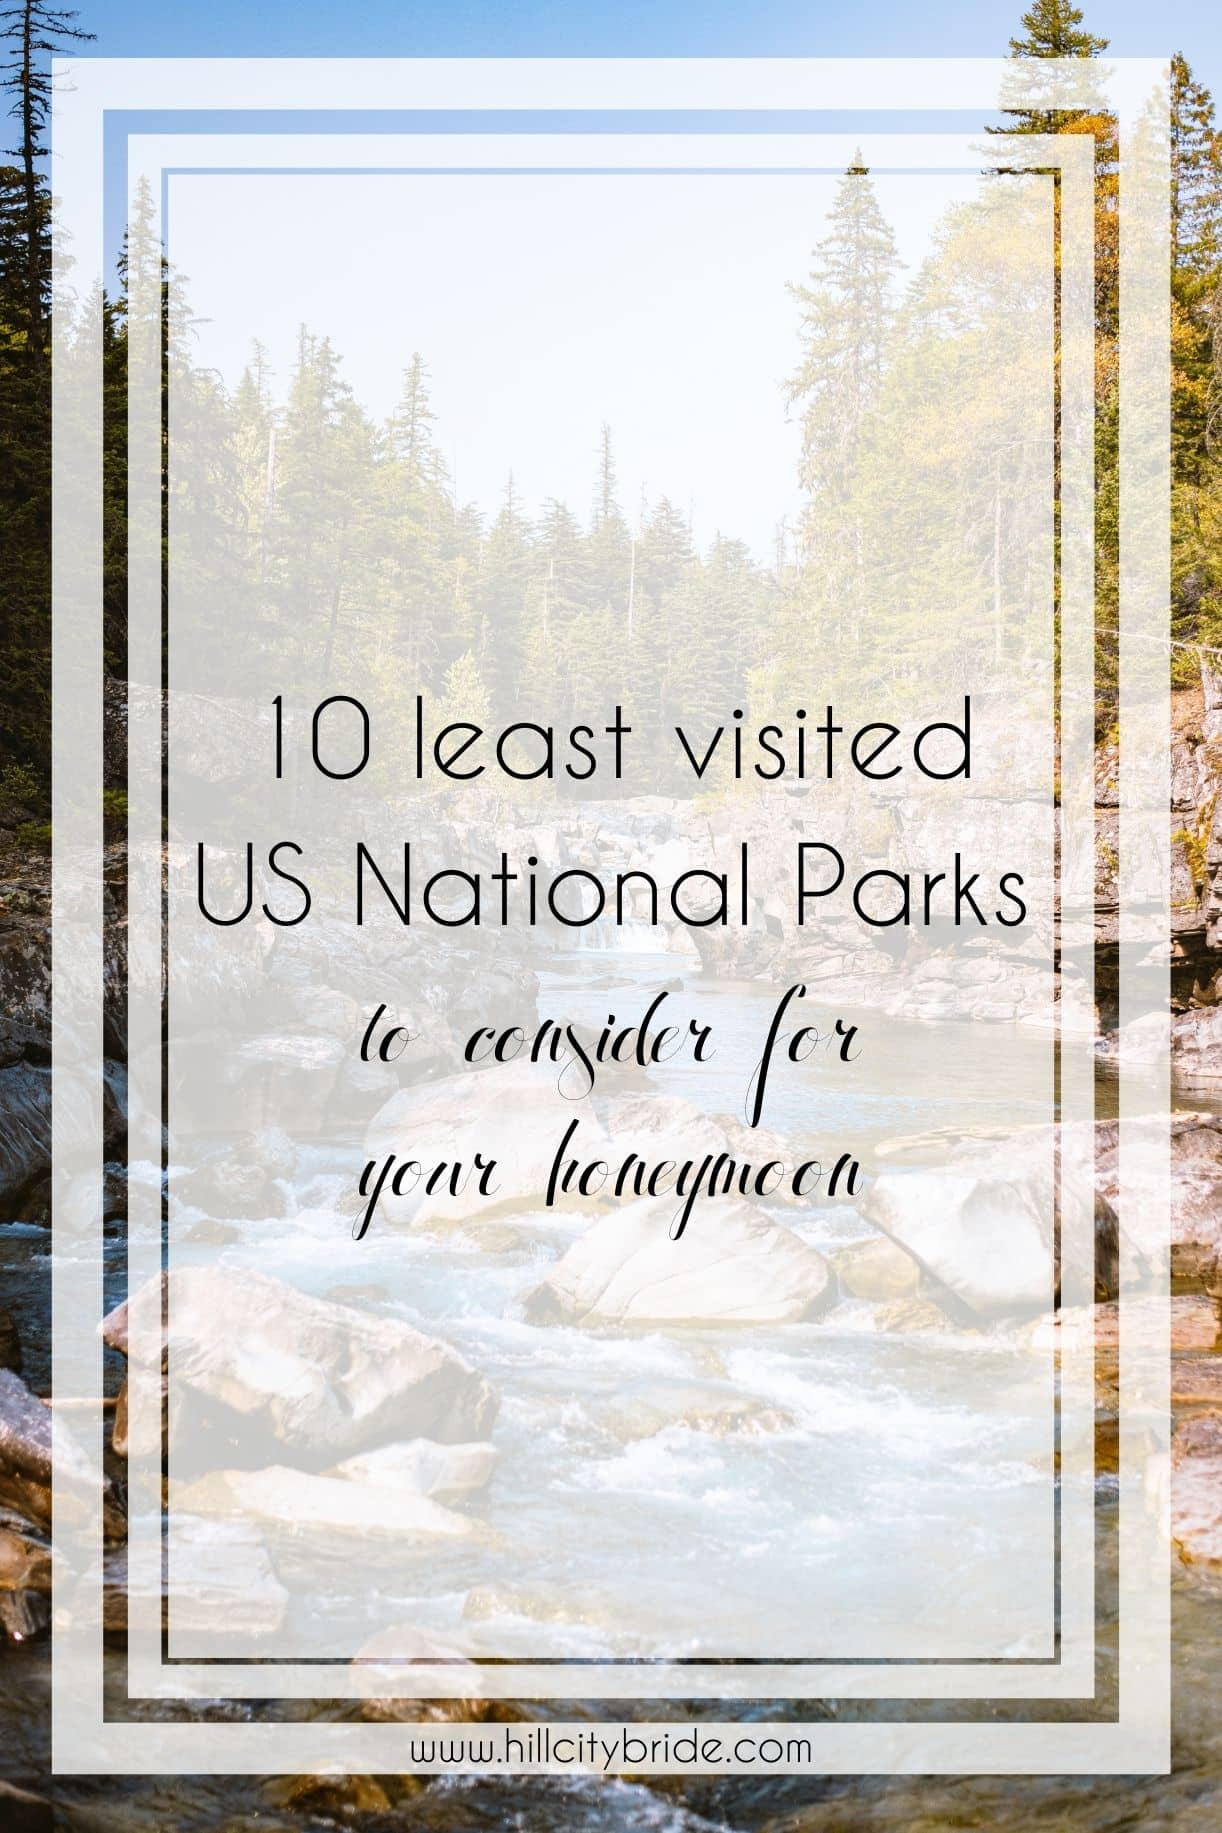 Plan a Great Honeymoon in One of the 10 Least Visited National Parks